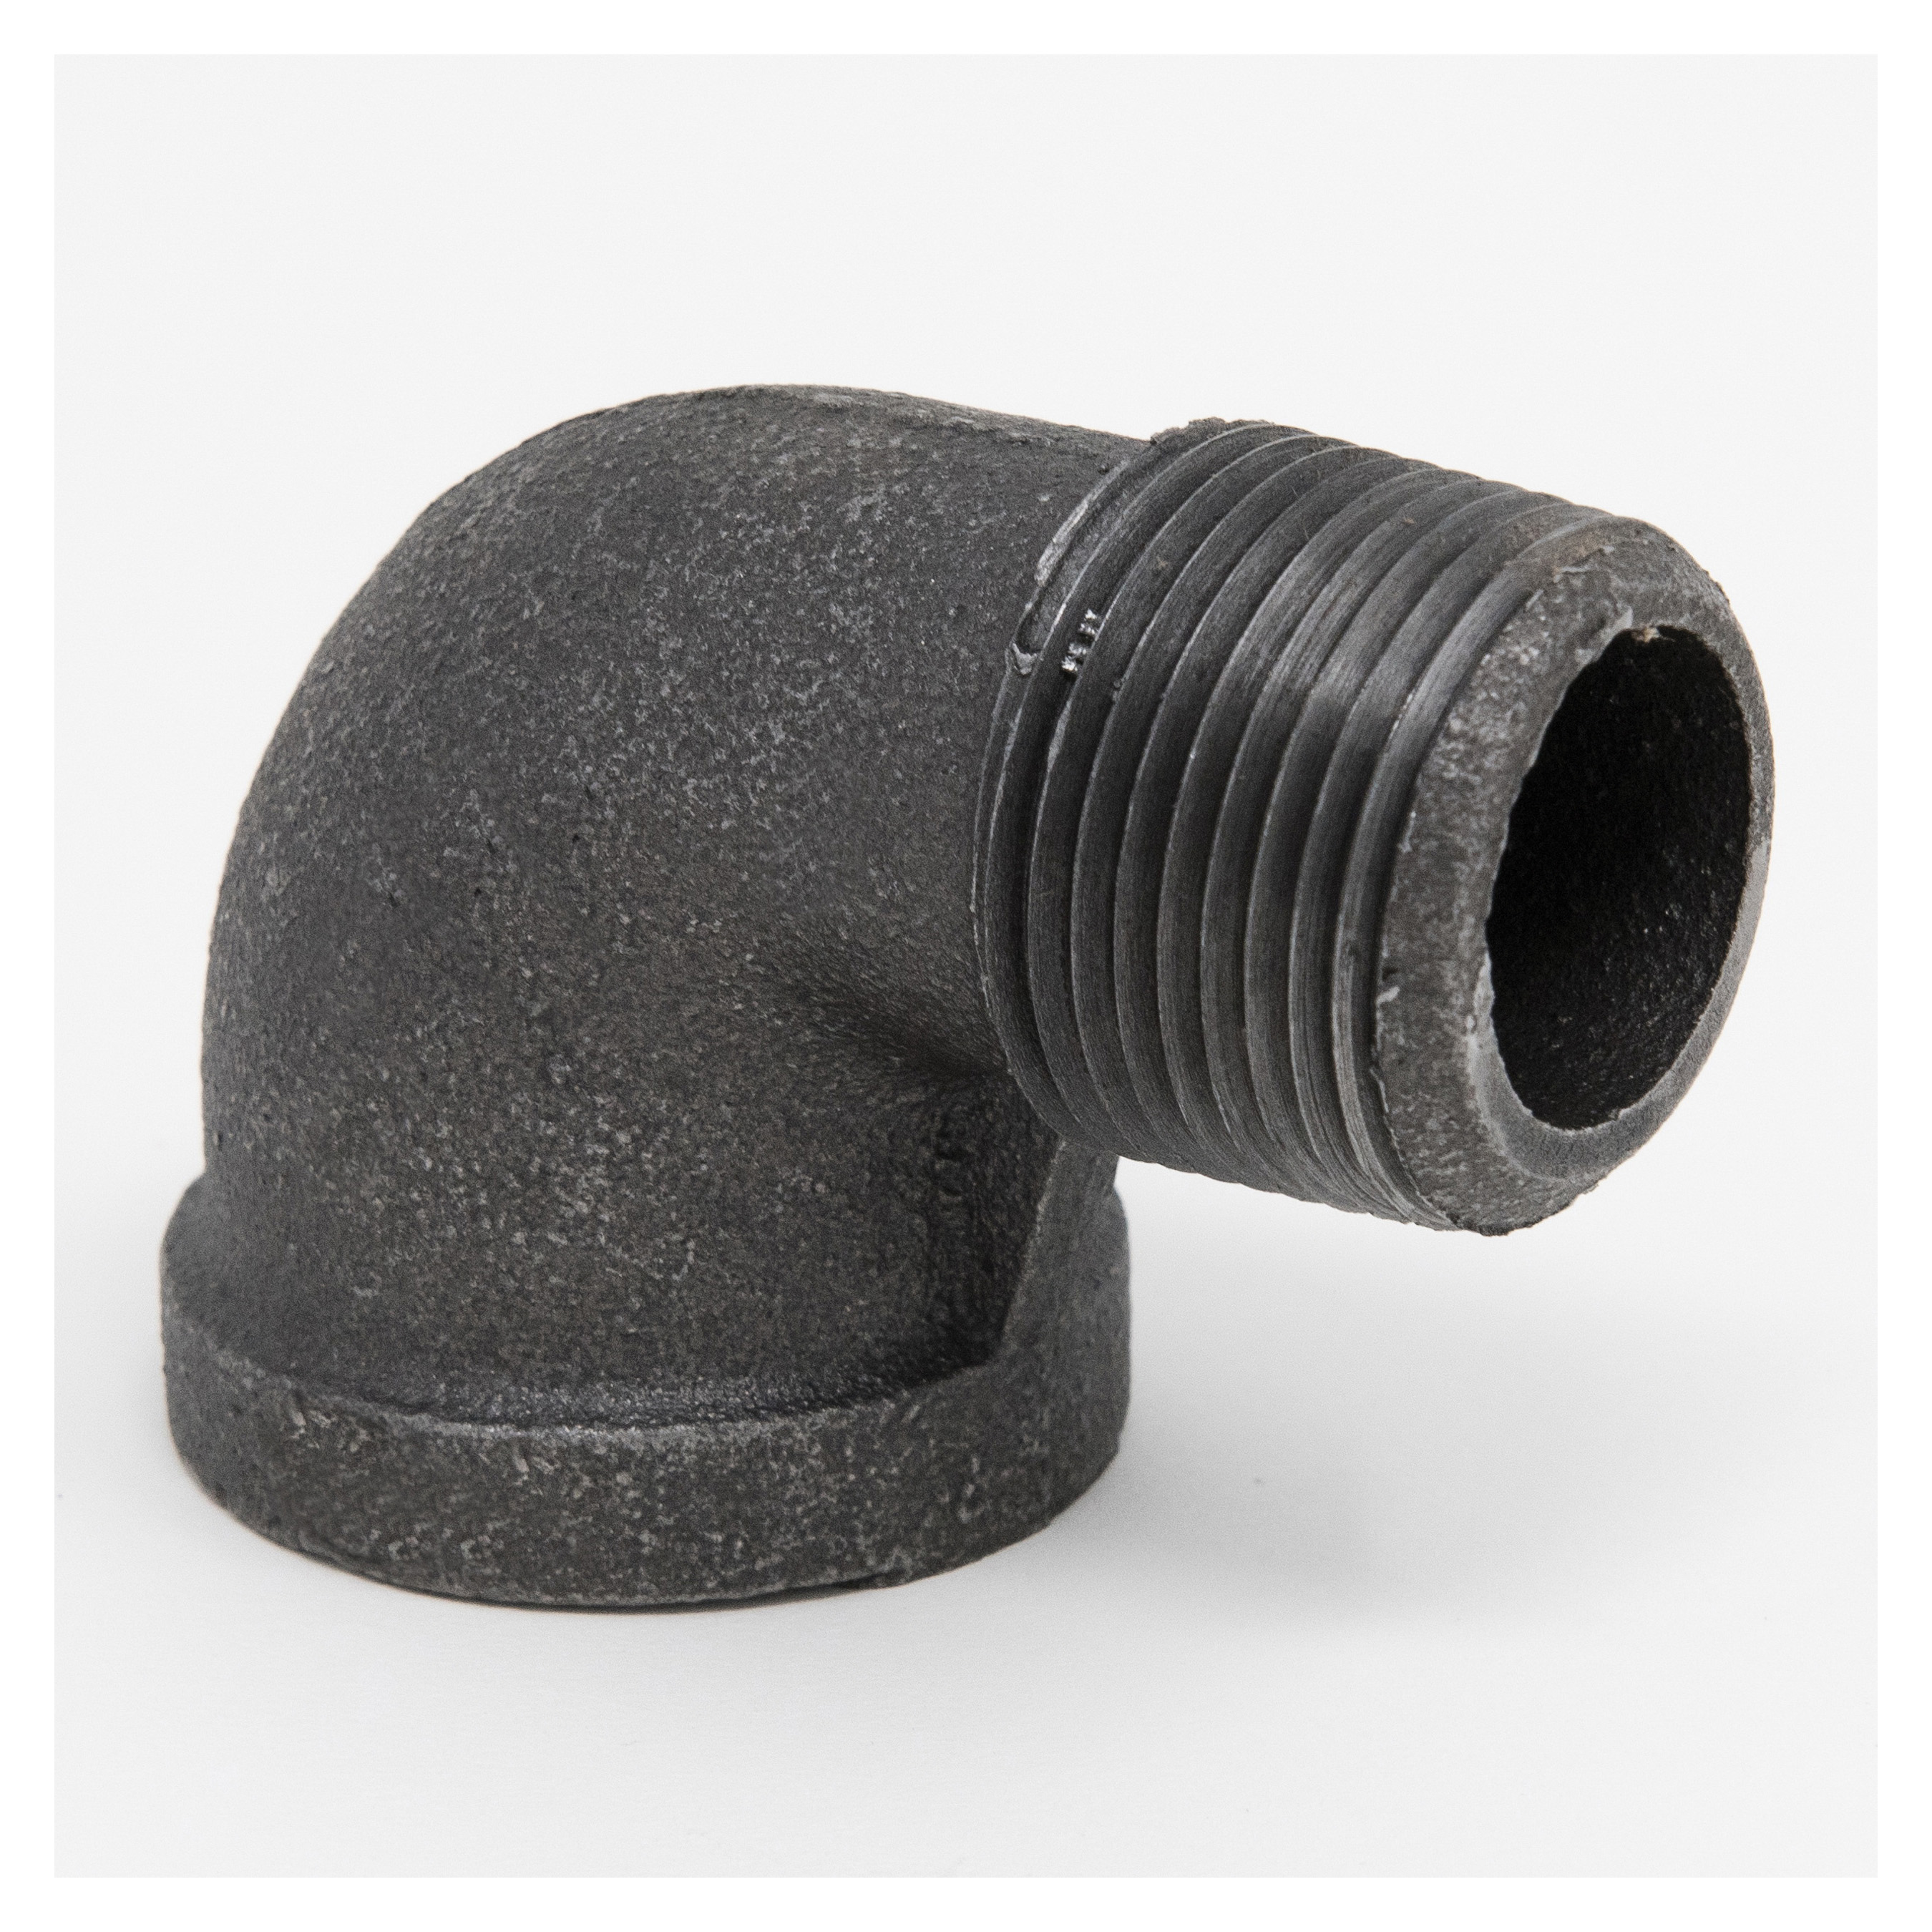 SPF/Anvil™ 0810017012 FIG 3103 Street Elbow, 1-1/2 in Nominal, MNPT x FNPT End Style, 150 lb, Malleable Iron, Black, Import